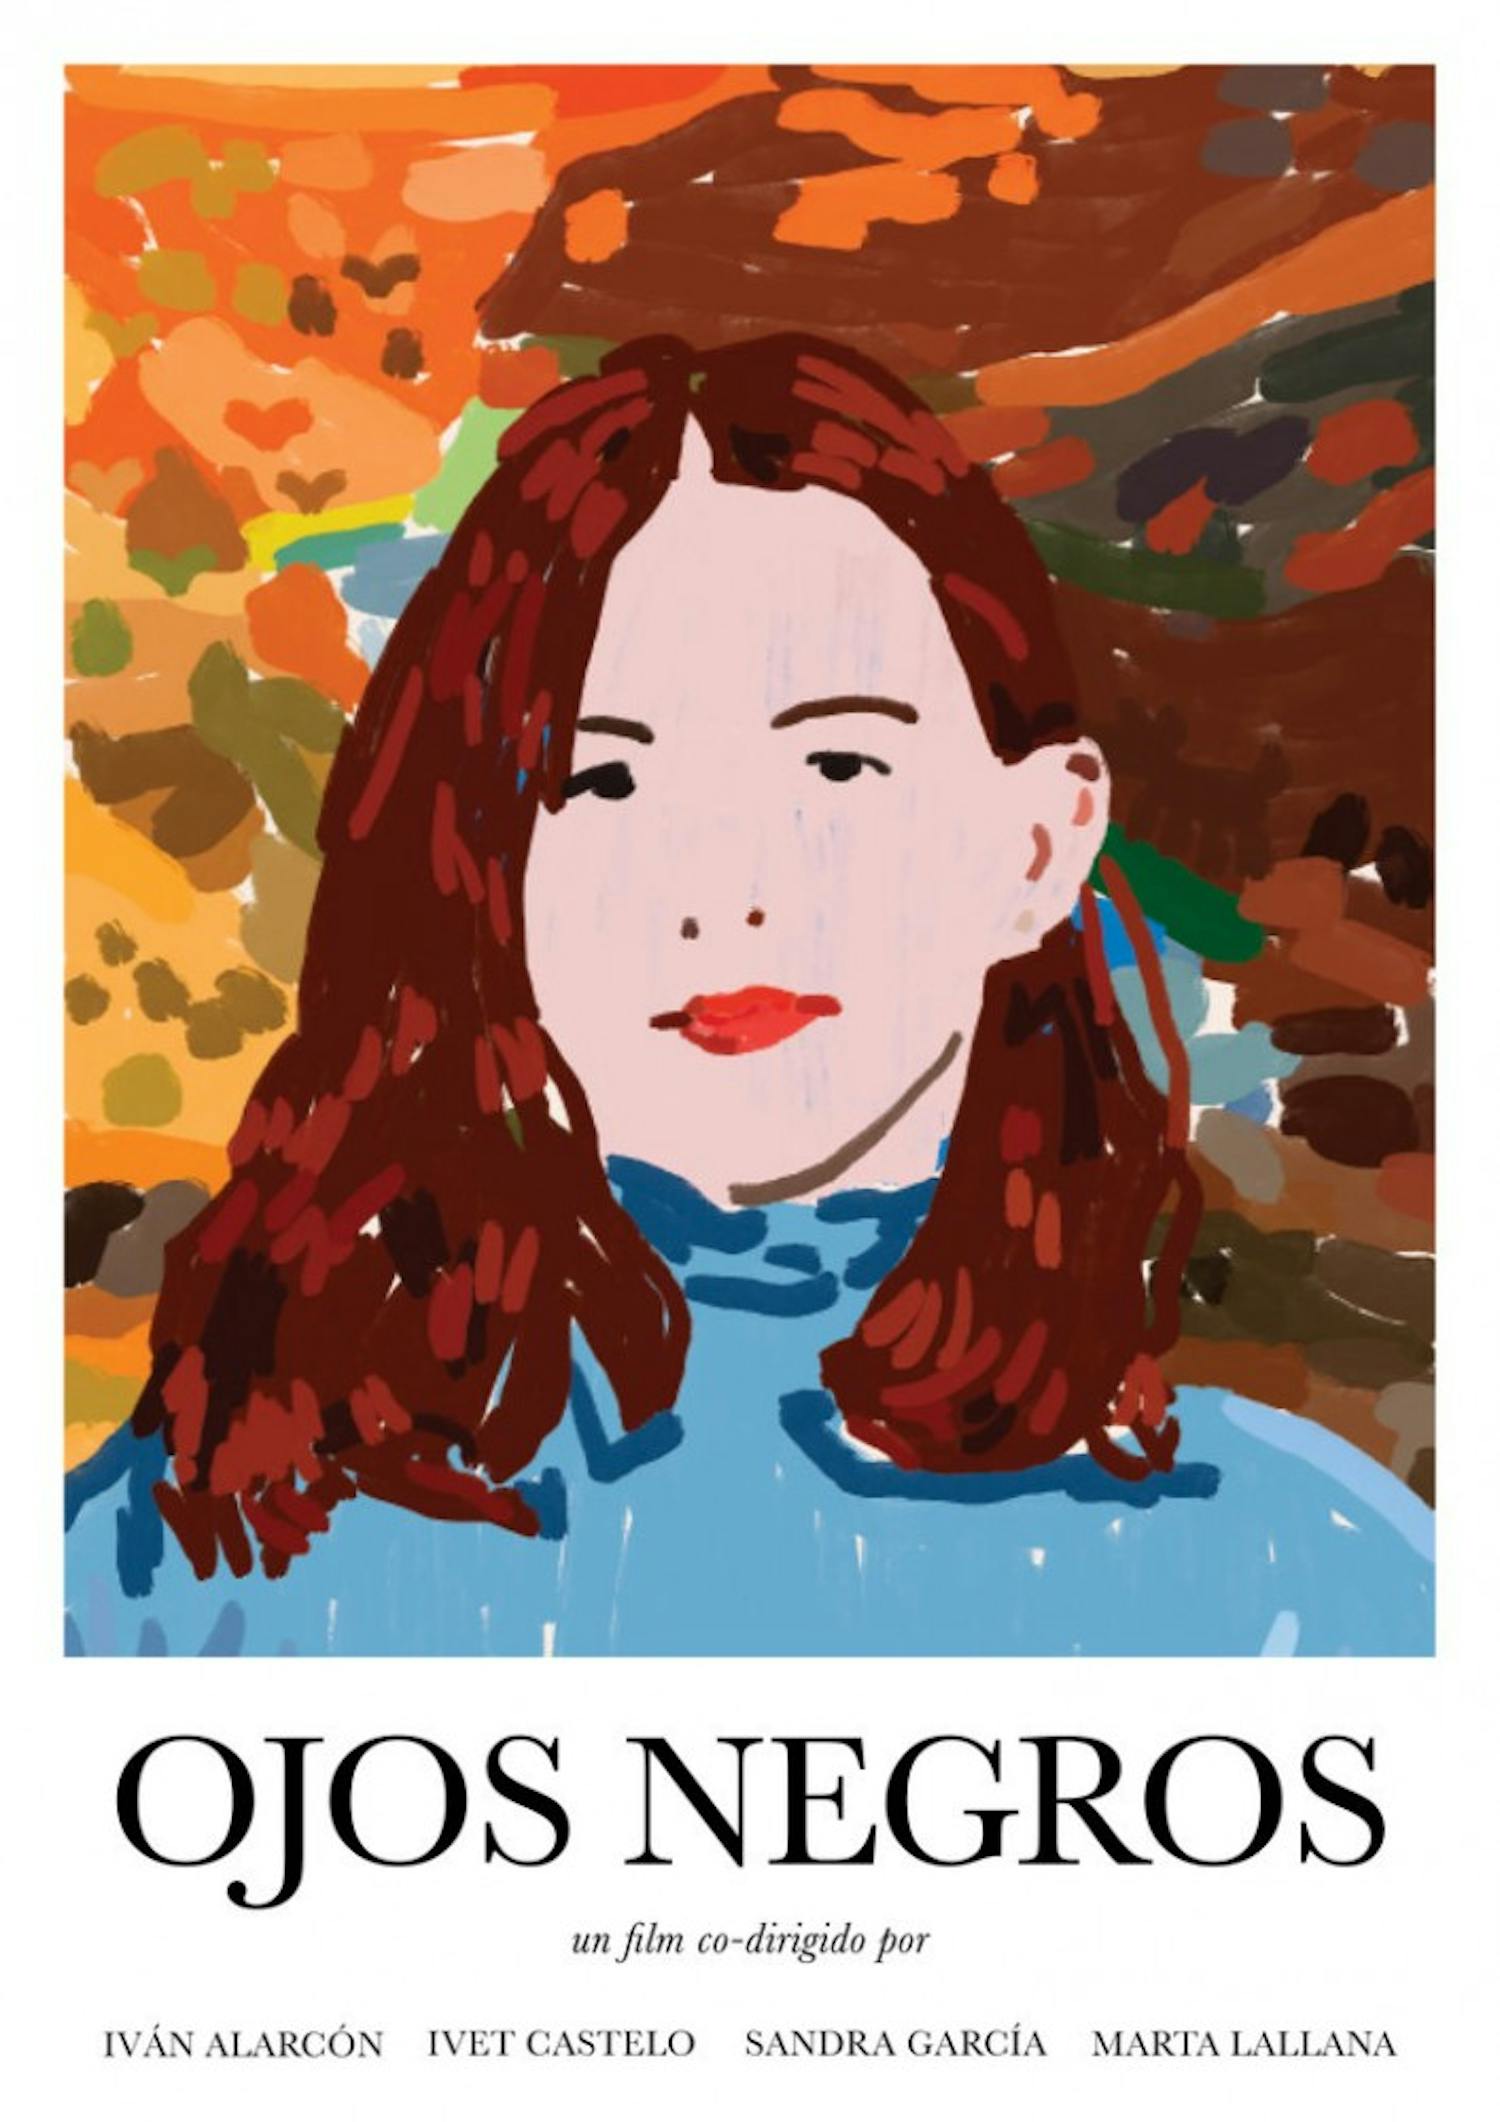 "Ojos Negros" is a feature film which takes&nbsp;place and is shot in Spain.